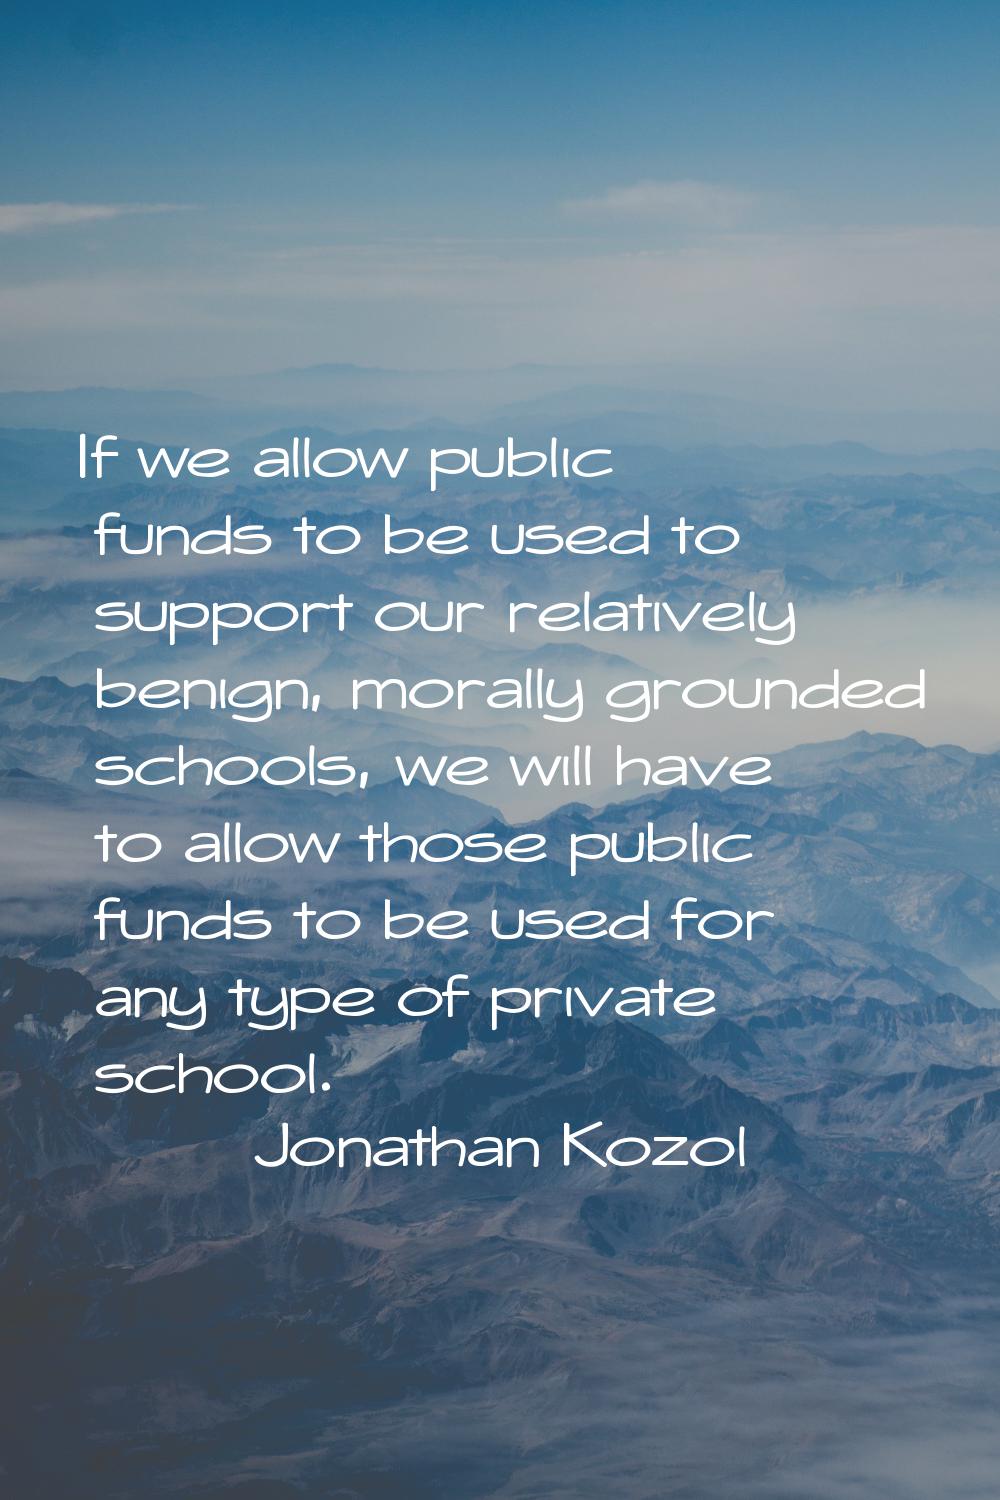 If we allow public funds to be used to support our relatively benign, morally grounded schools, we 